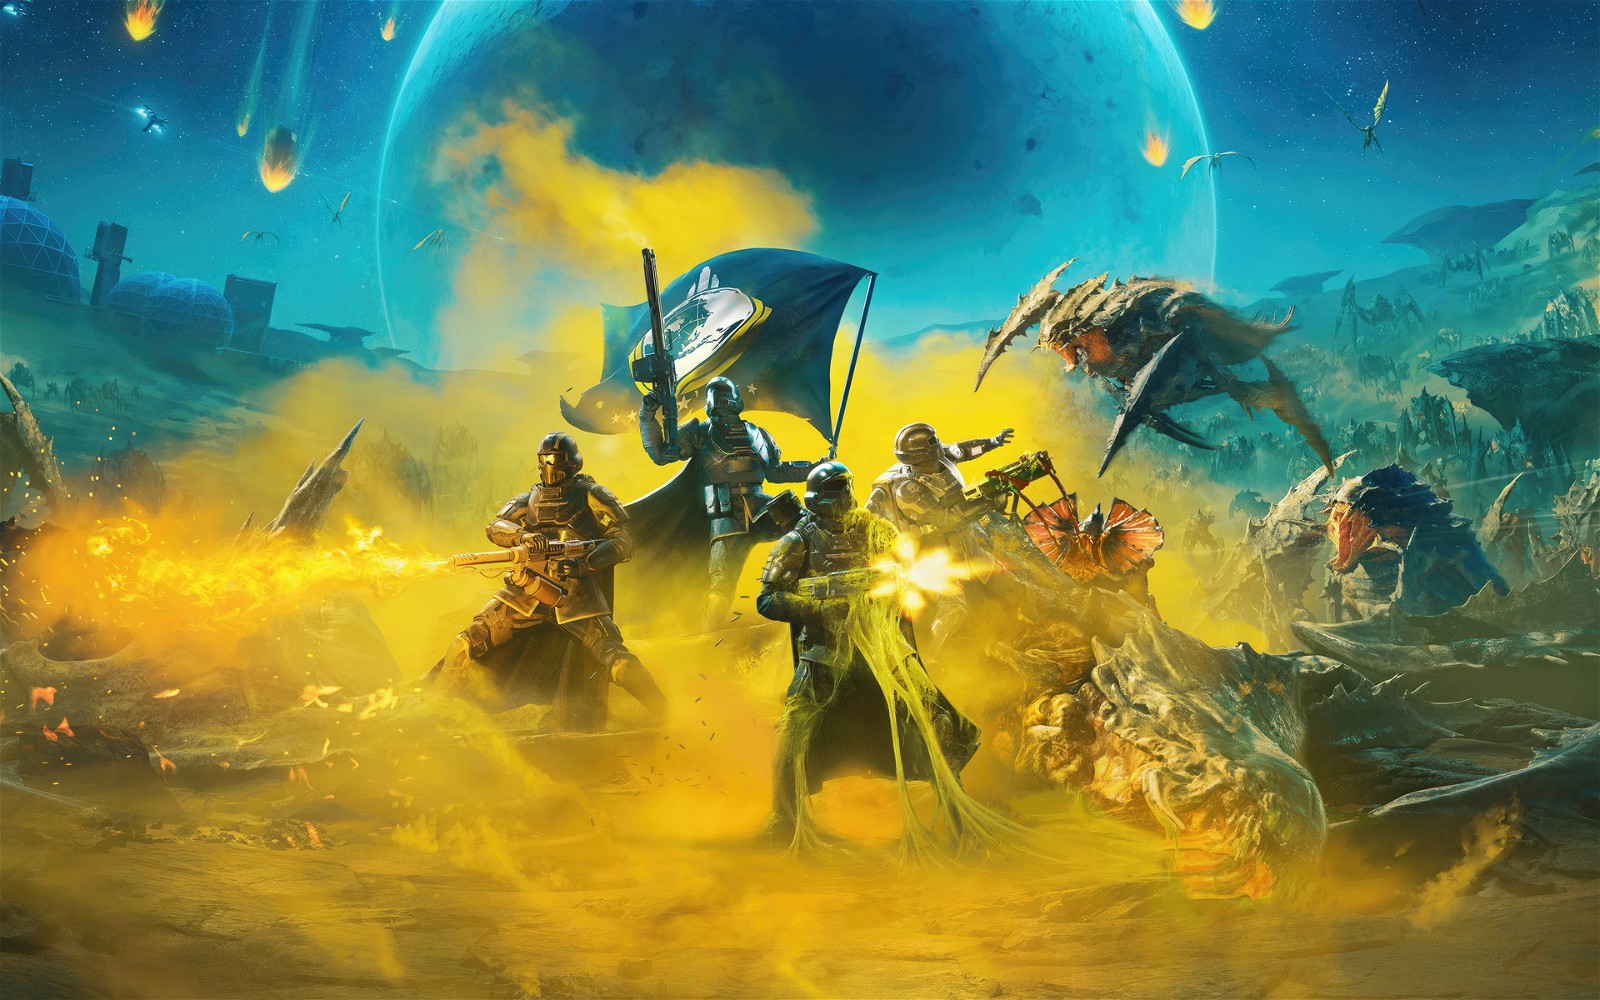 PlayStation might just feel generous and bring Helldivers 2 to Xbox consoles after all.